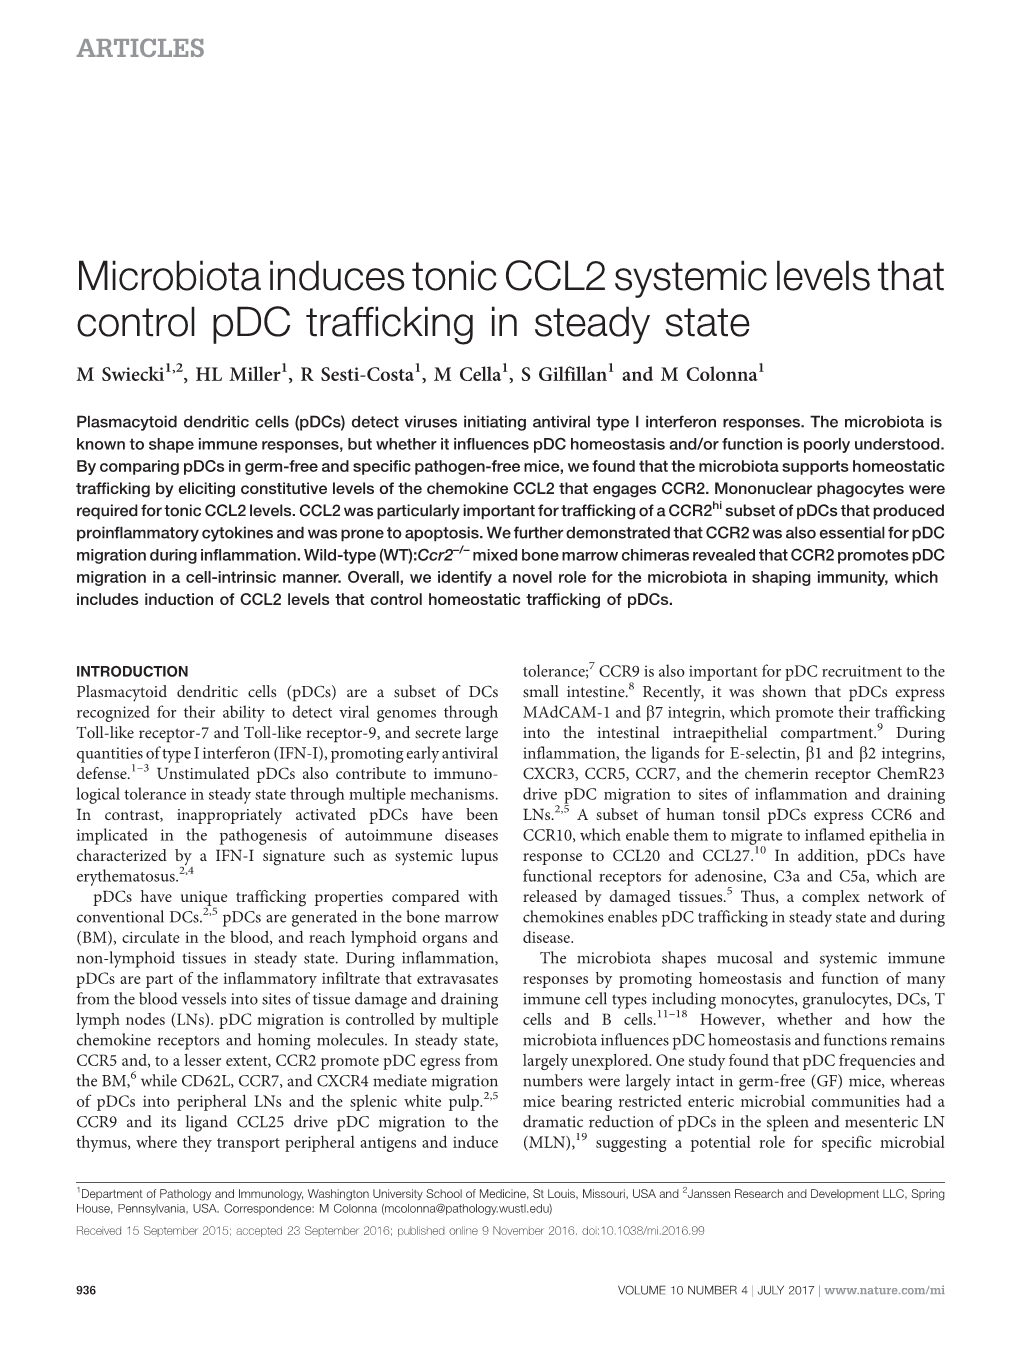 Microbiota Induces Tonic CCL2 Systemic Levels That Control Pdc Trafficking in Steady State